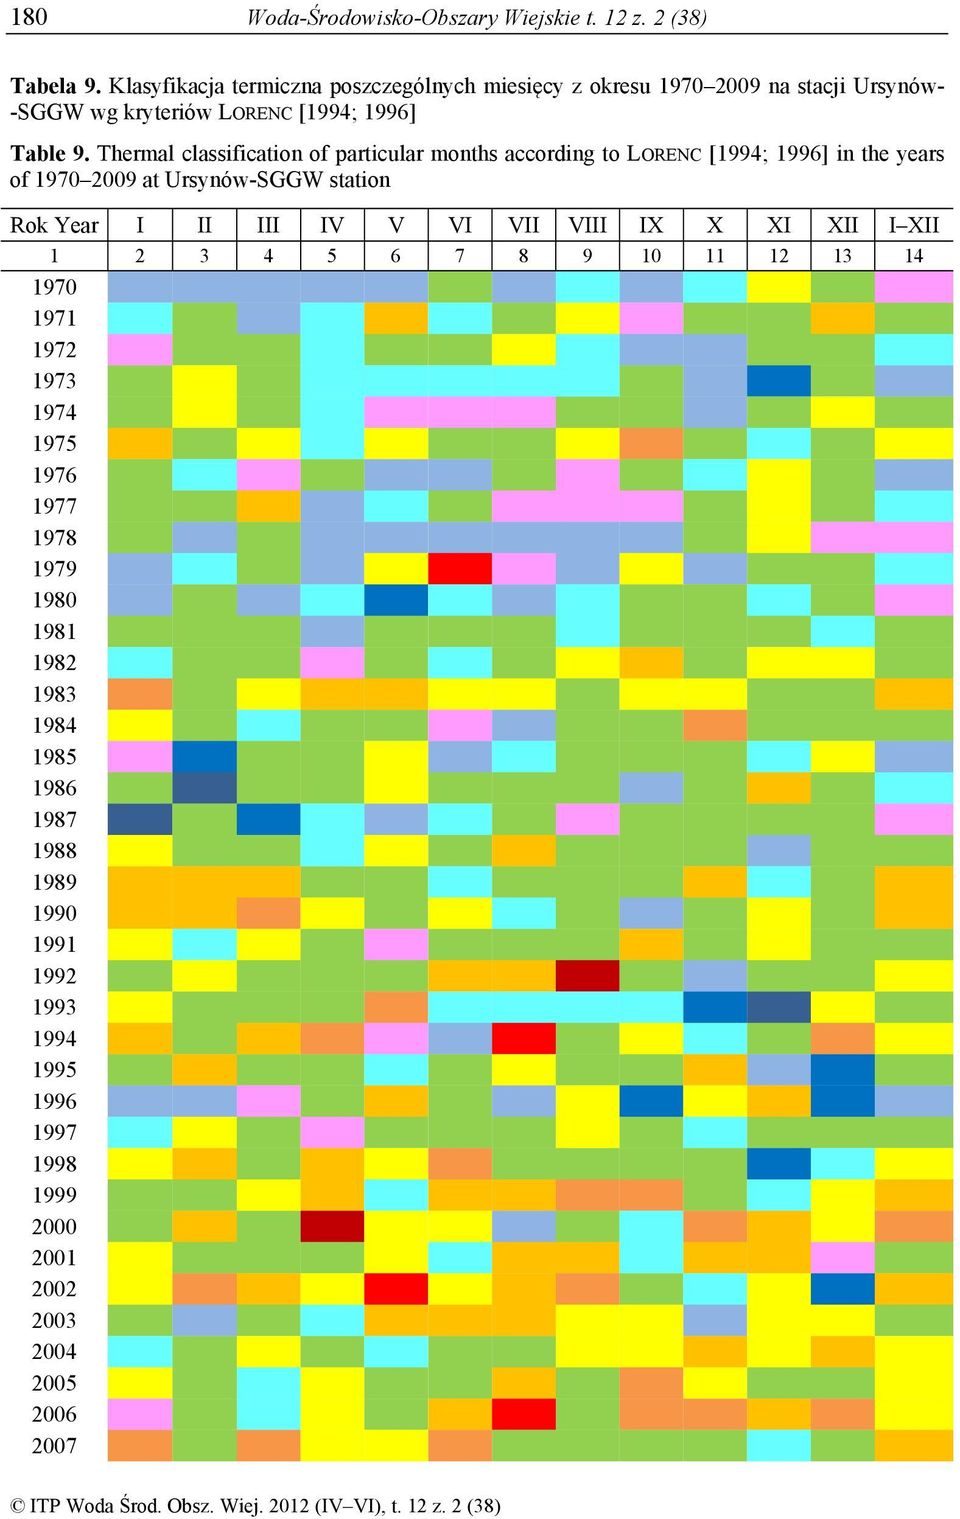 Thermal classification of particular months according to LORENC [1994; 1996] in the years of 1970 2009 at Ursynów-SGGW station Rok Year I II III IV V